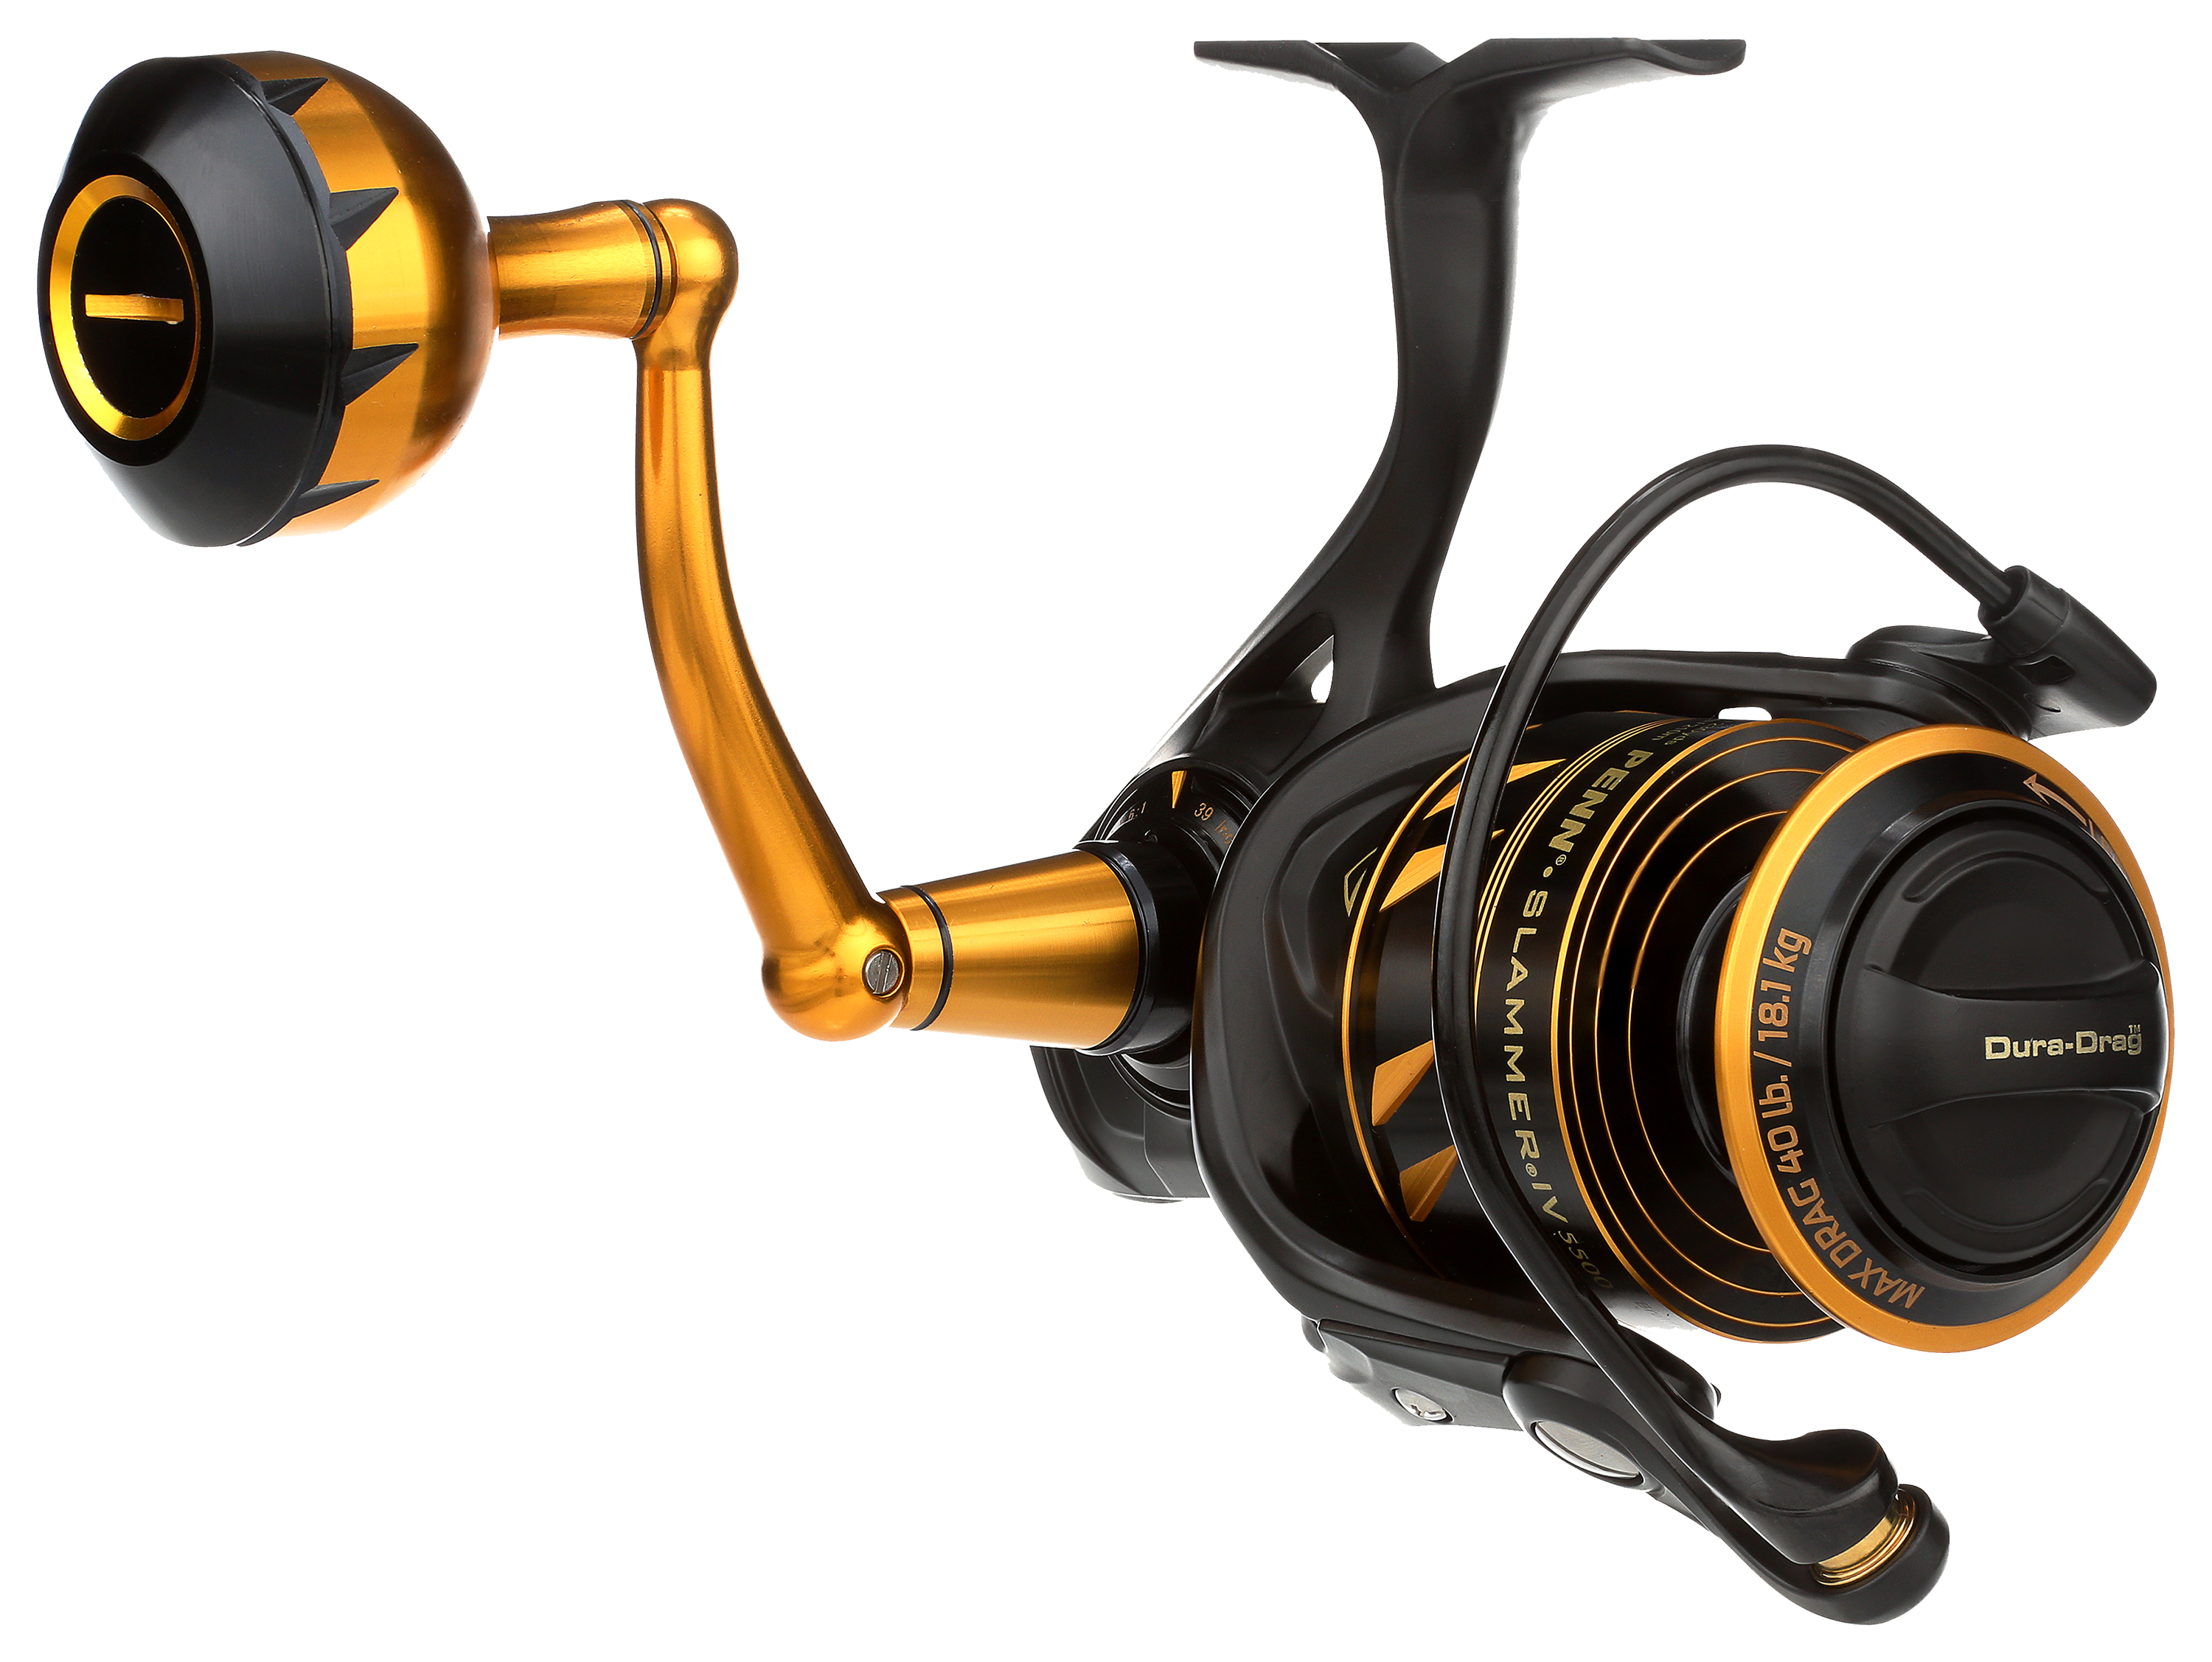 Penn Spinfisher VI 2500, 3500, 4500 reviews and reports so far